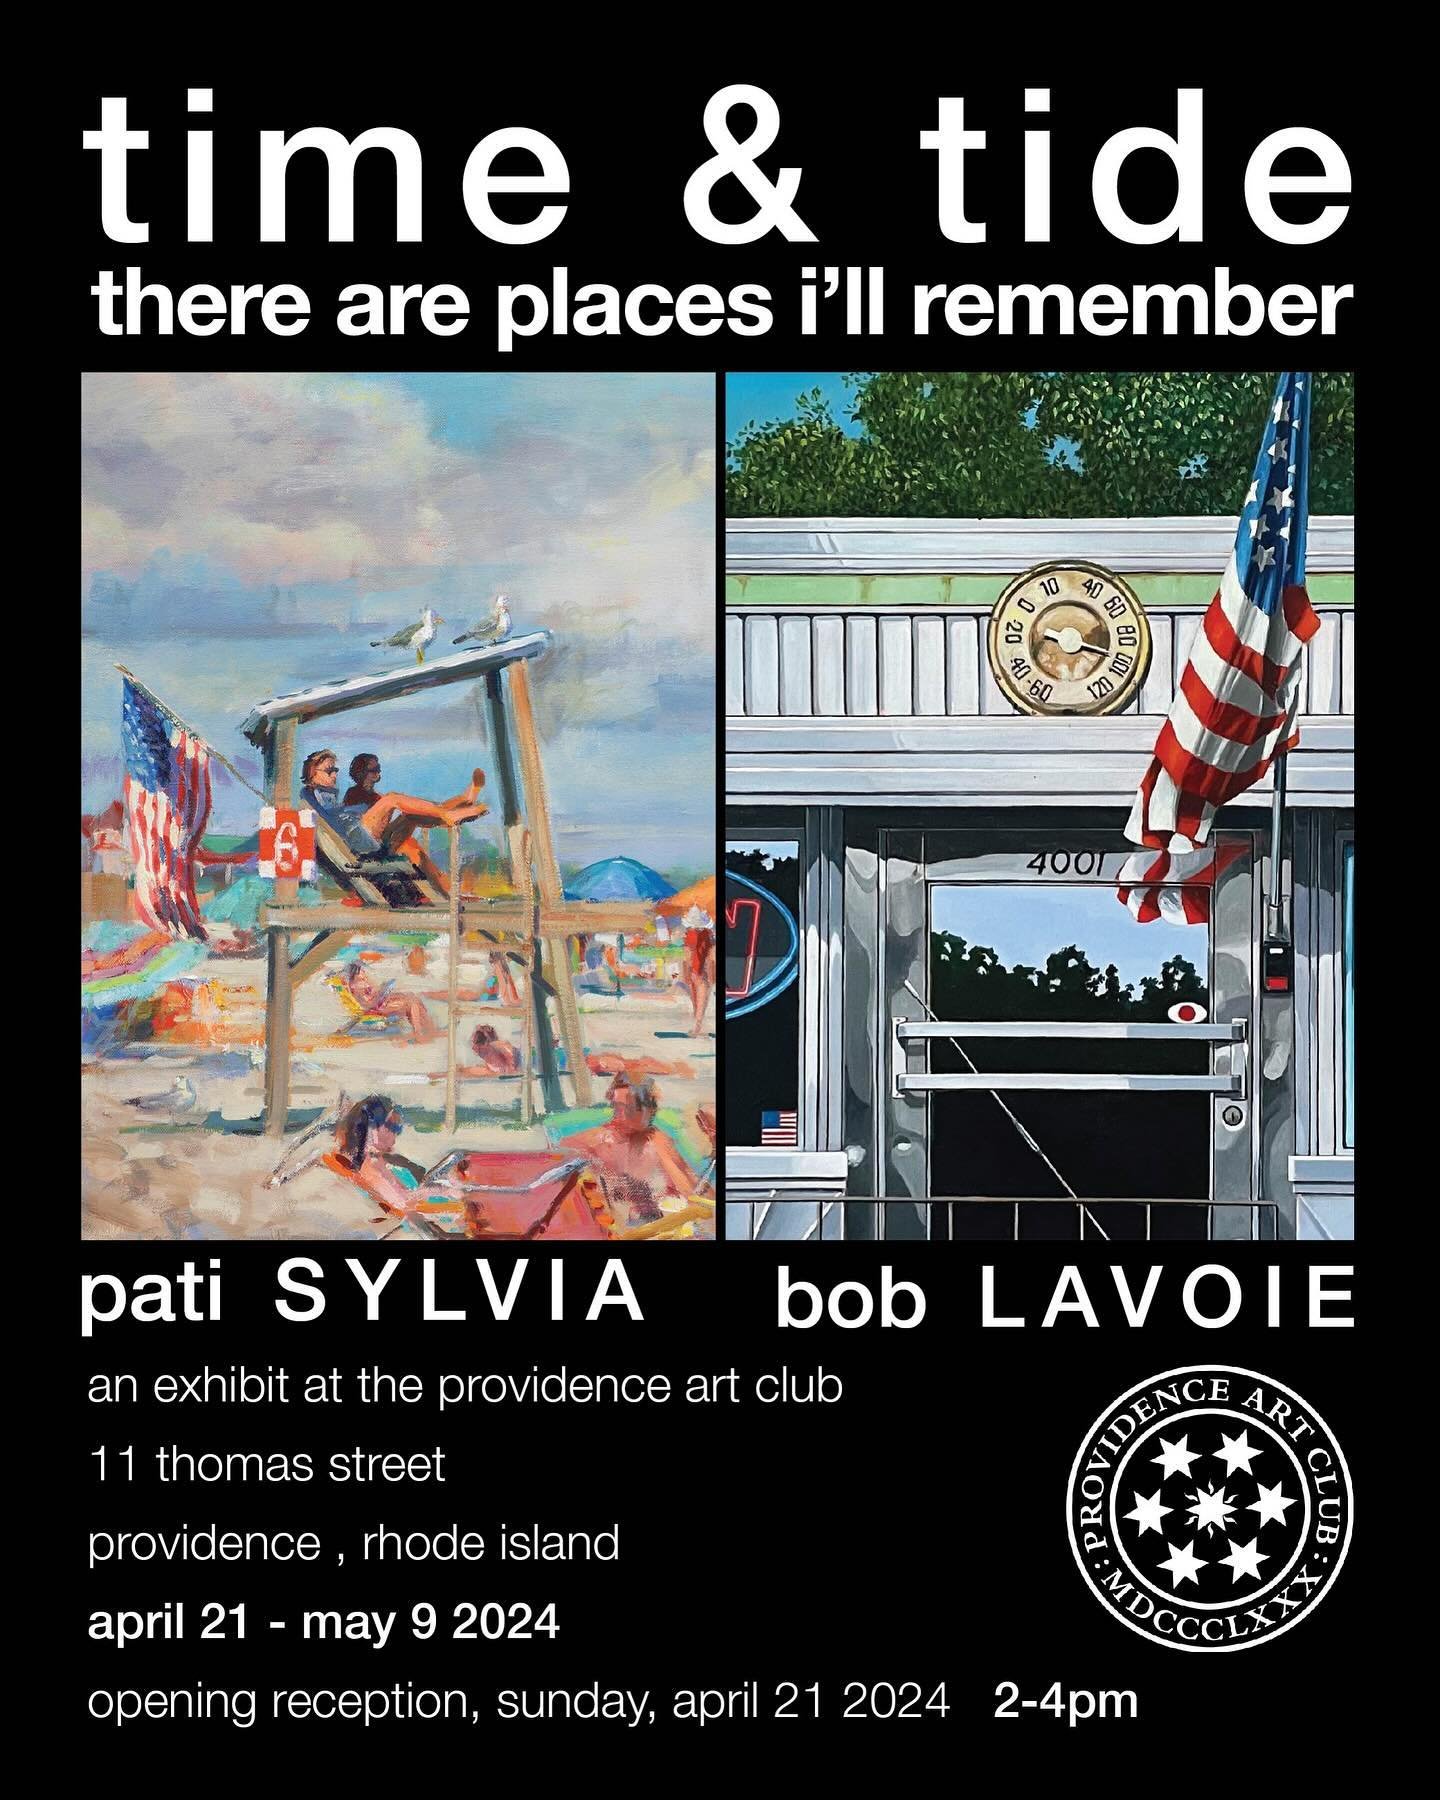 Join us for the opening of our oil painting exhibit! Reception is April 21, 2-4 at Providence Art Club 
Guaranteed to leave you wistful and maybe a bit homesick.